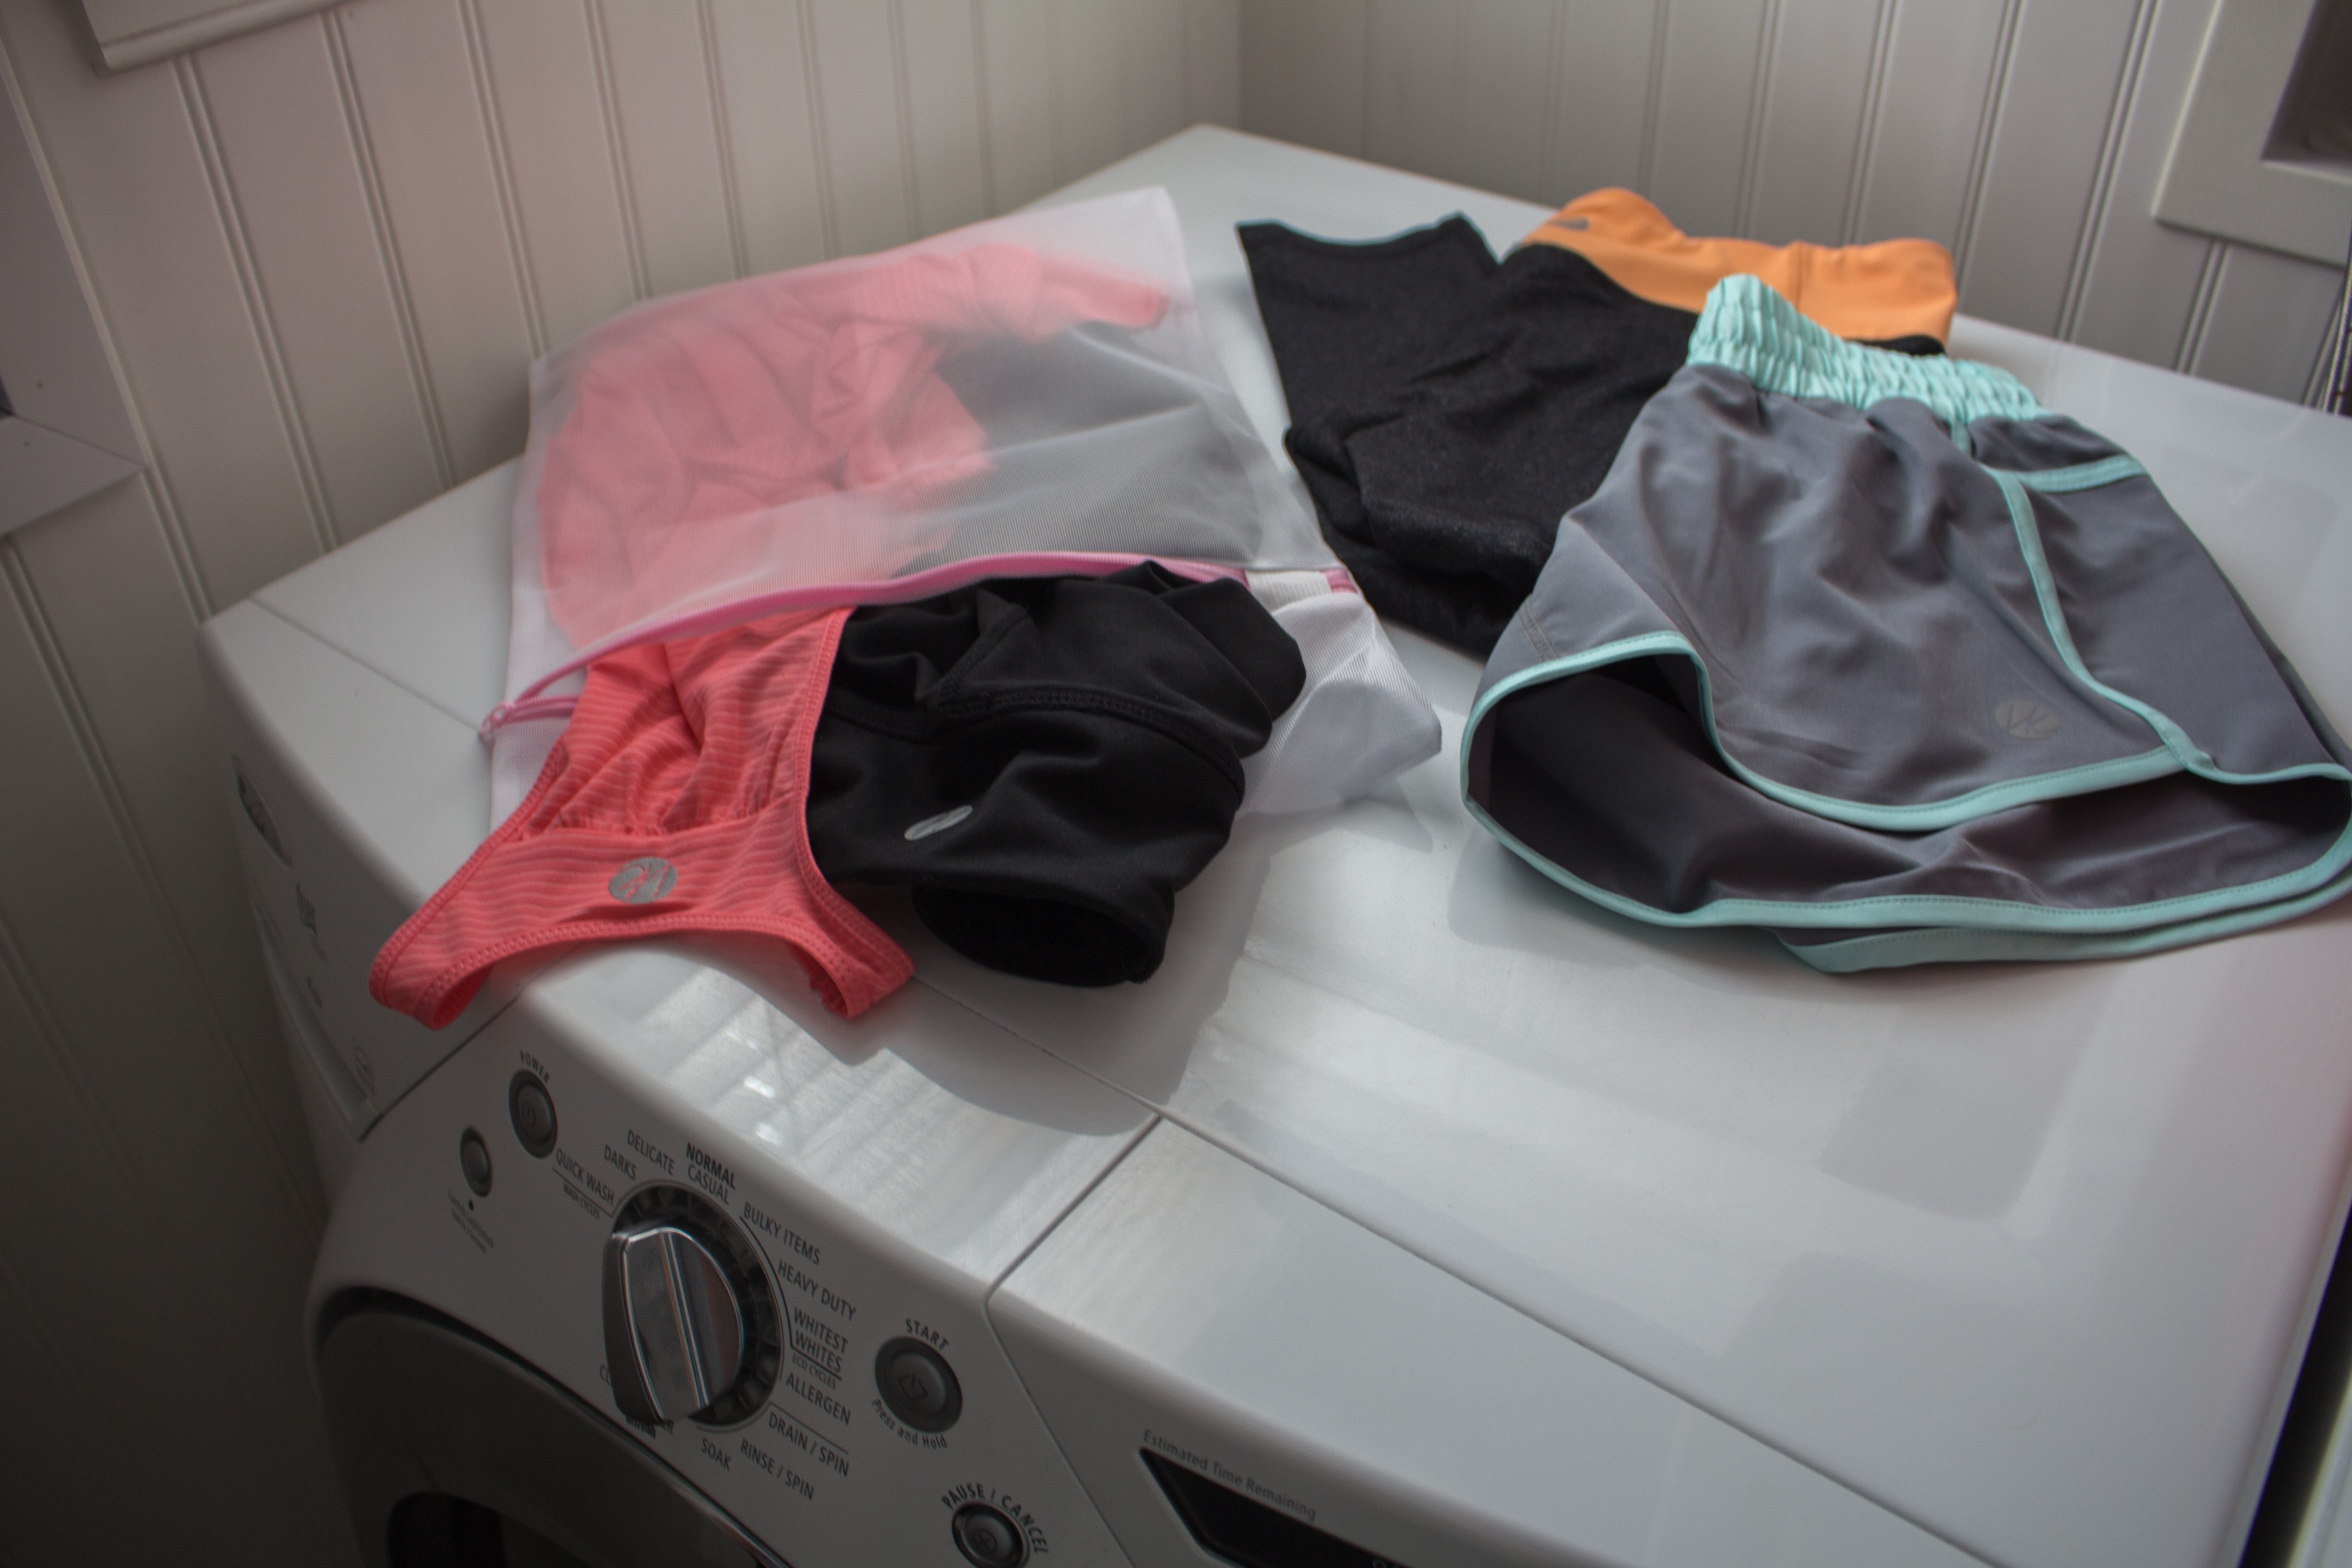 How To Wash Workout Clothes According To The Experts - Chatelaine